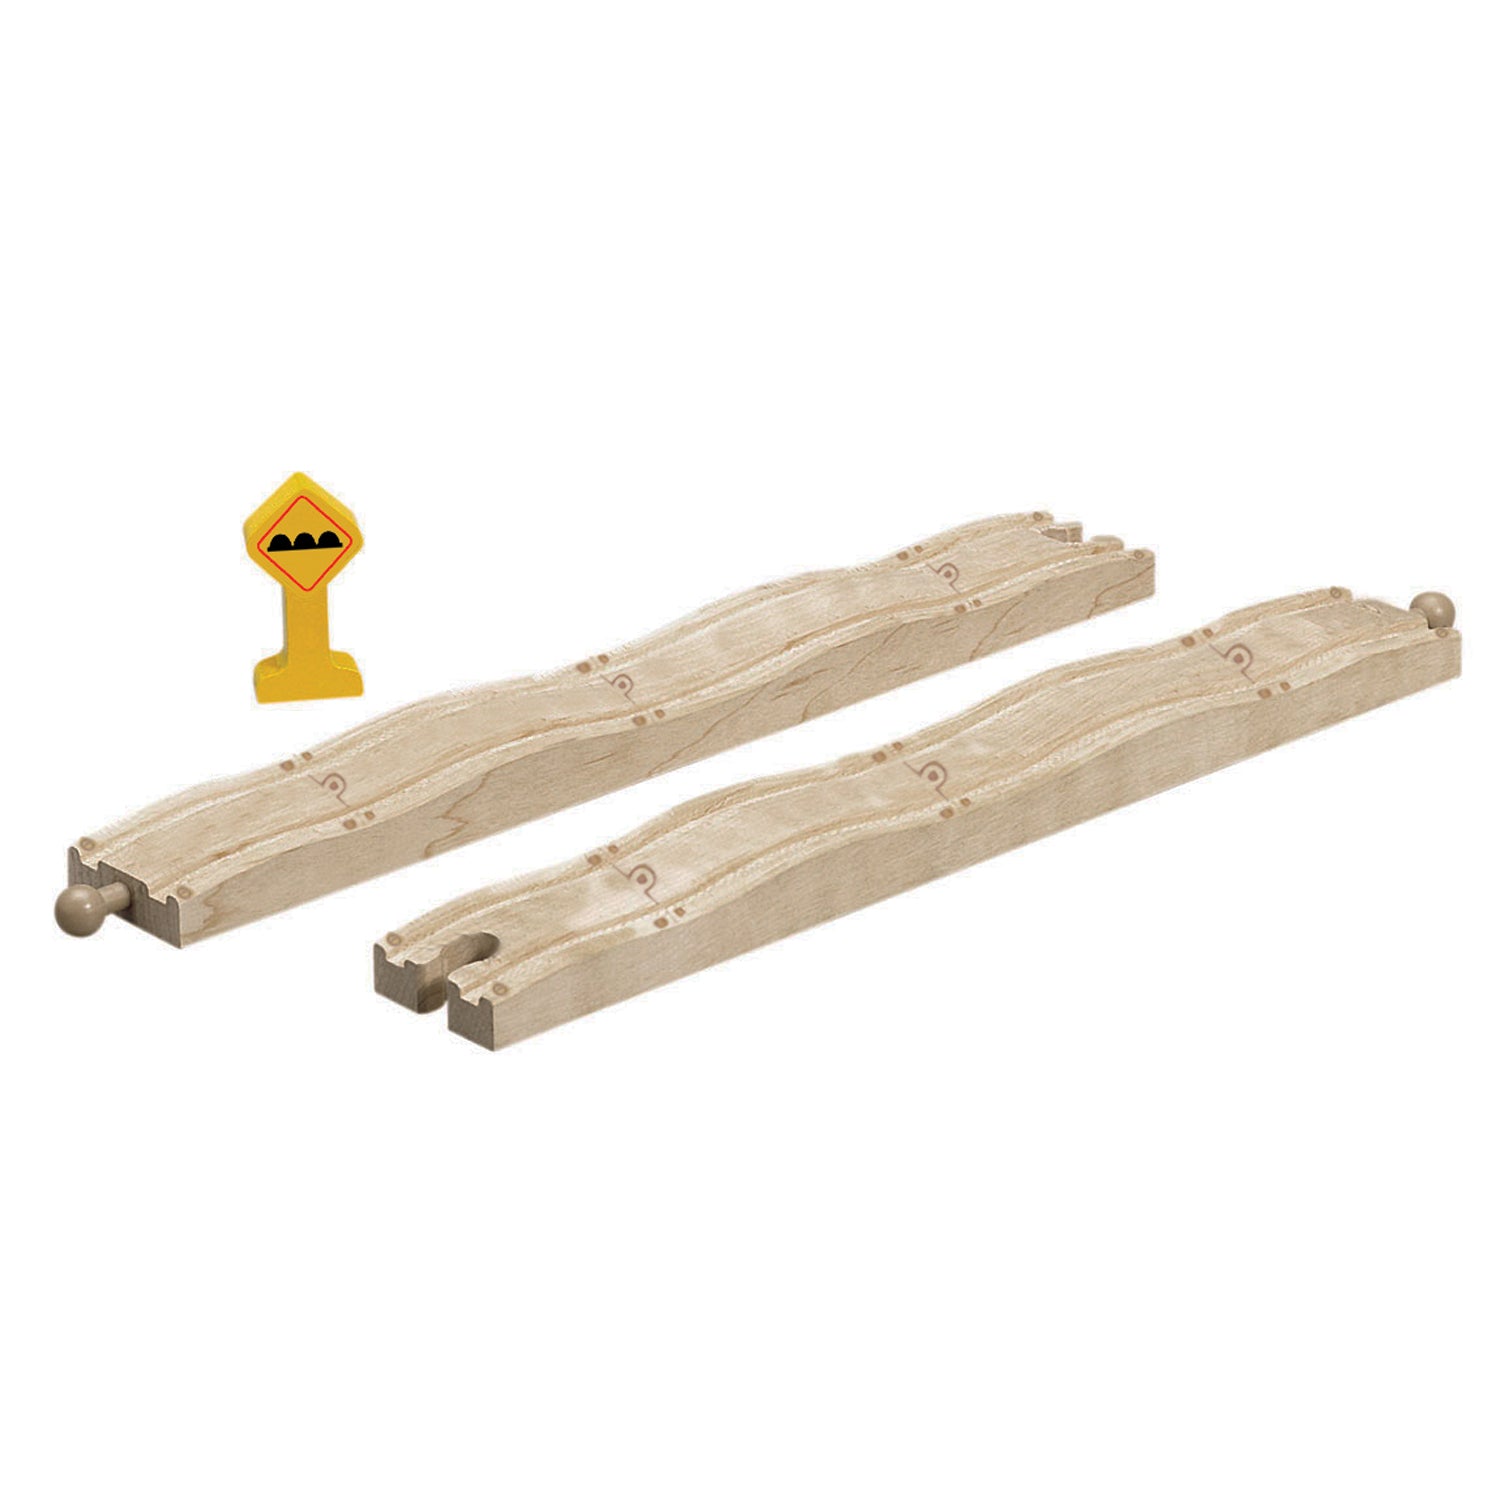 Chuggington Wooden Railway Track - Wobbly Track Pack